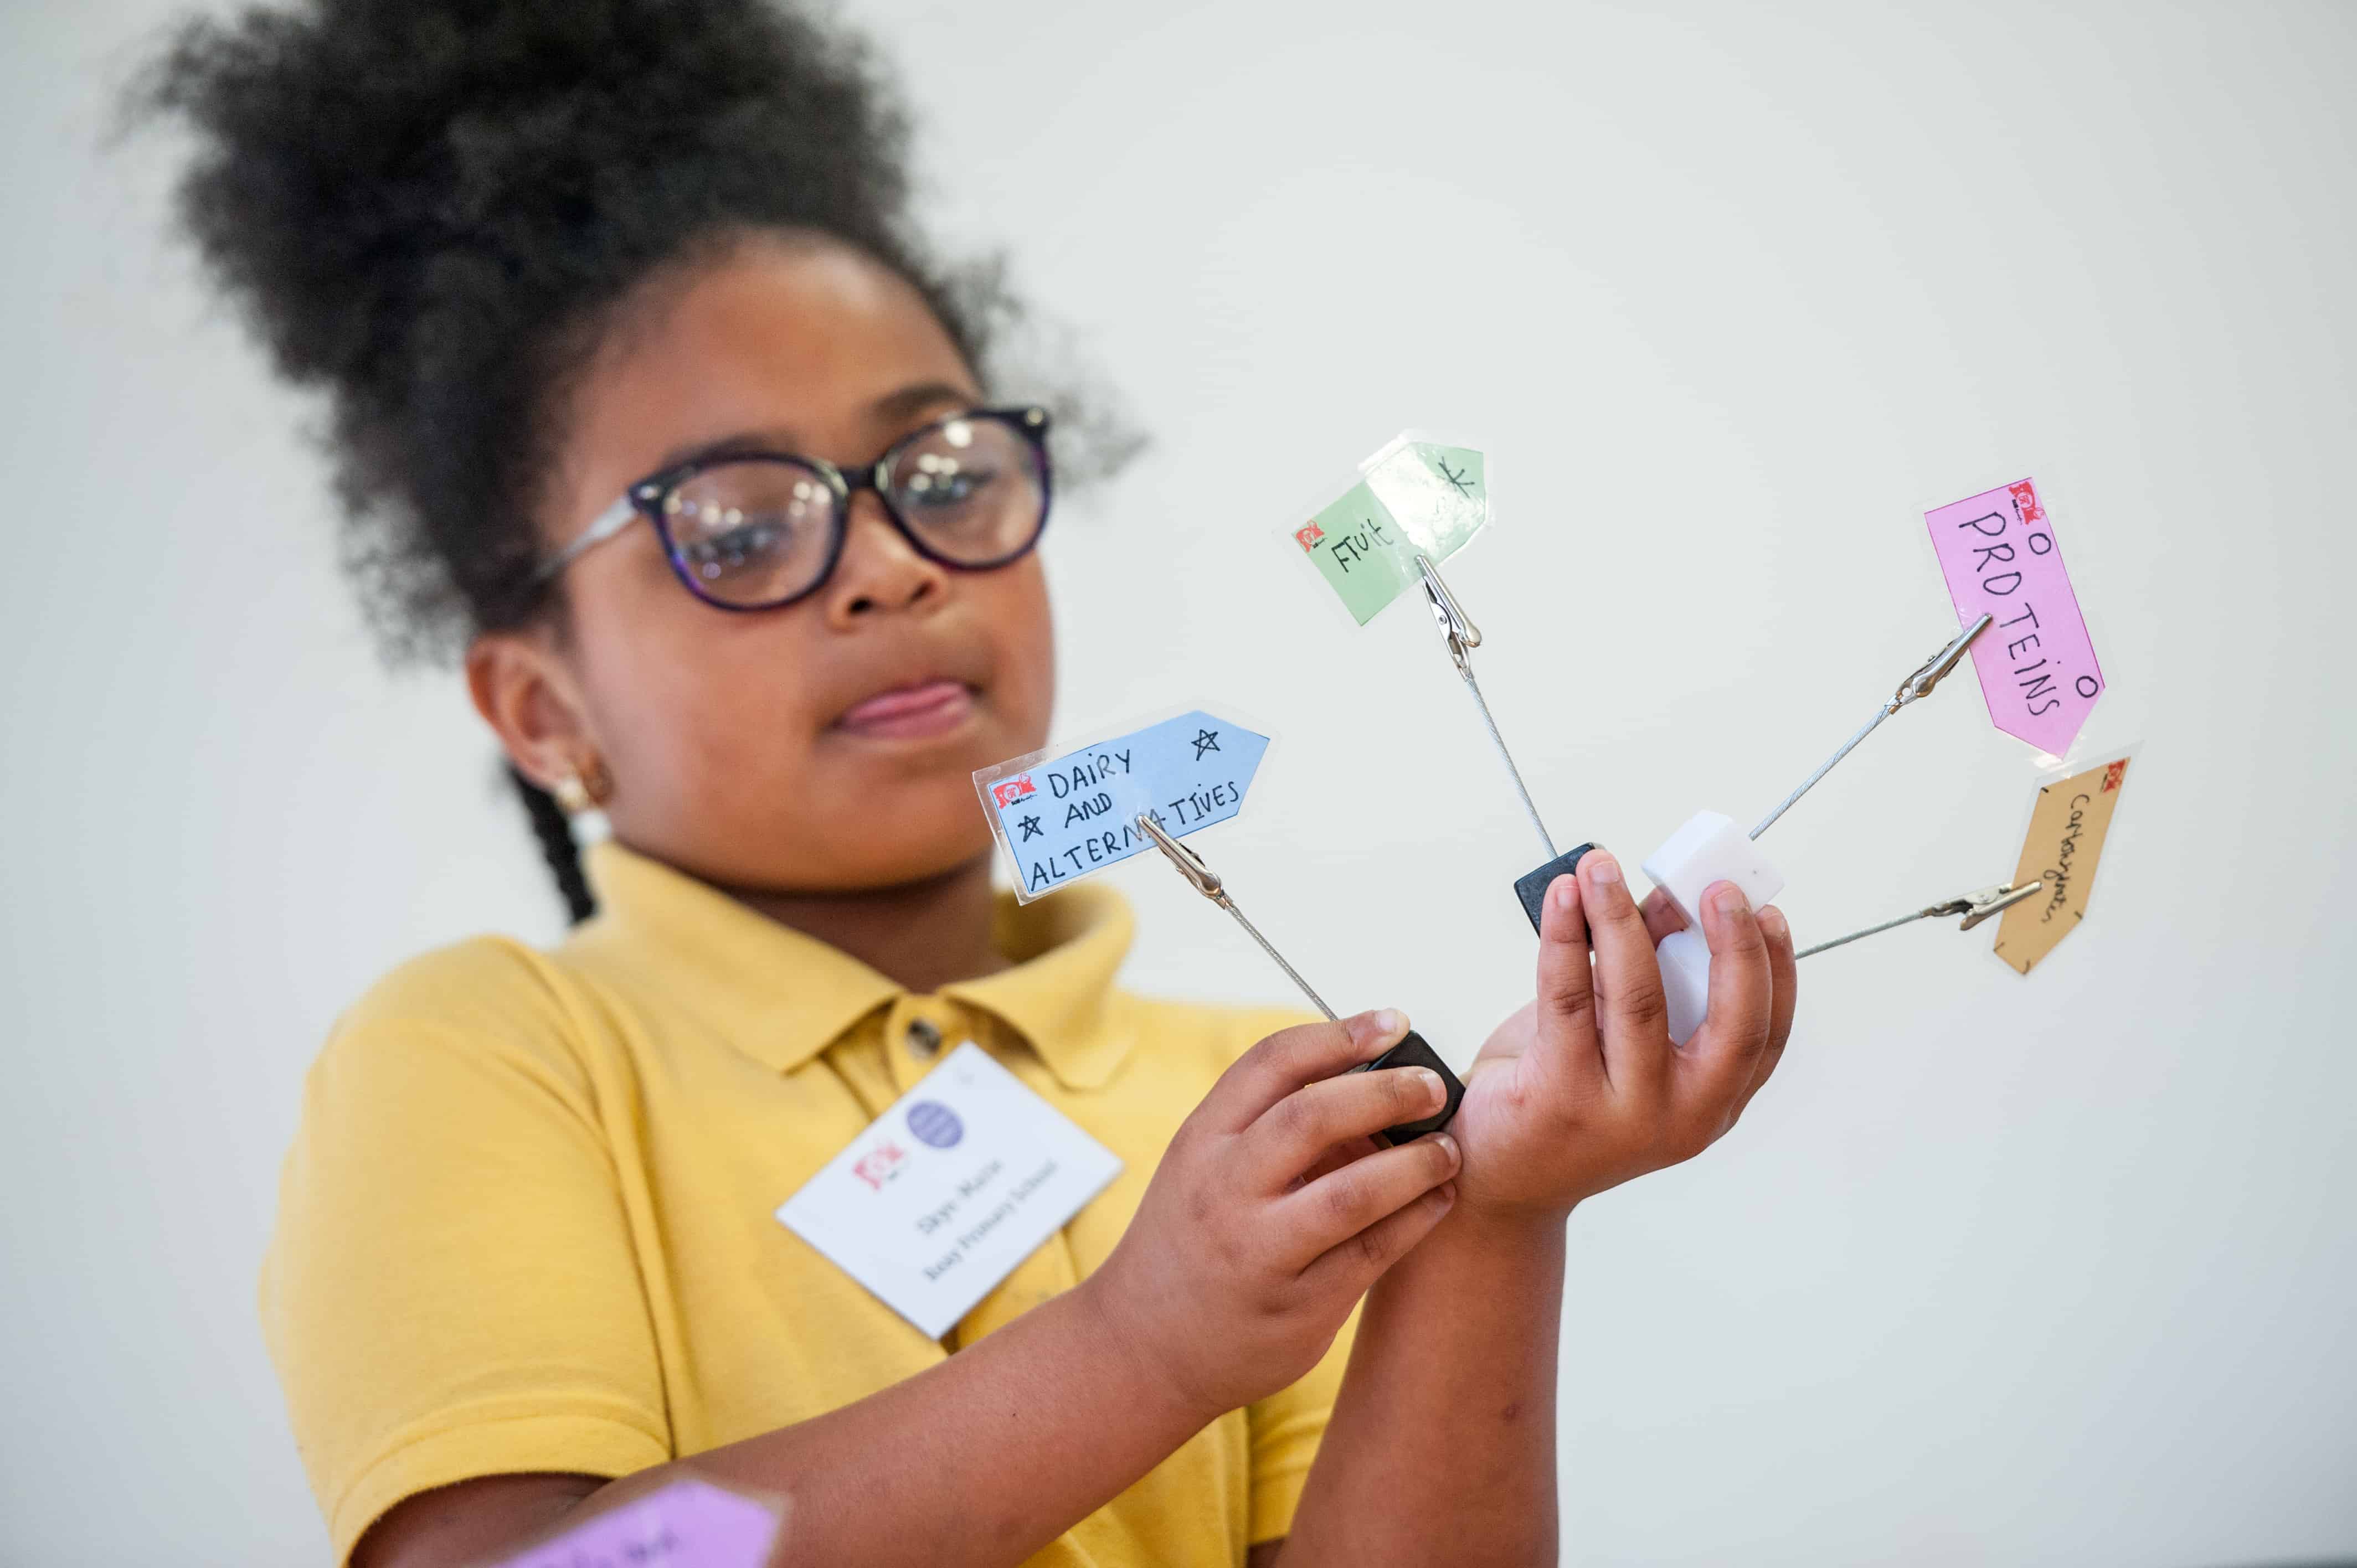 Pupils from various schools across London take part in the Food for Life Celebration Workshop held in conjunction with several partners (Soil Association, Southwark Council, John Lewis and multiple catering companies, 10th July 2019 Photography by Fergus Burnett